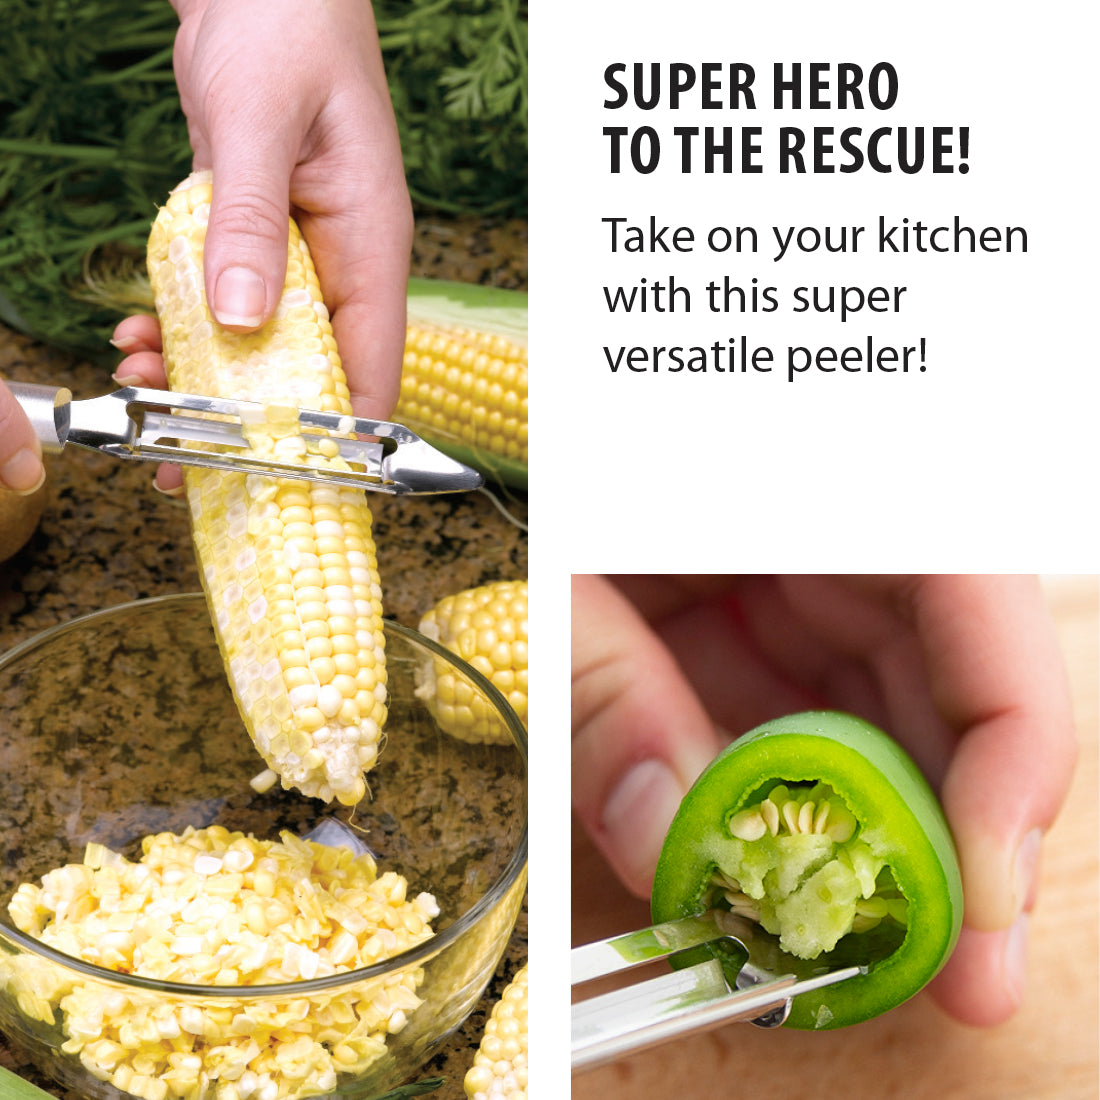 All In One Vegetable Peeler, 3 and 1 Vegetable and Fruit Peeler, All-In-One  Vegetable